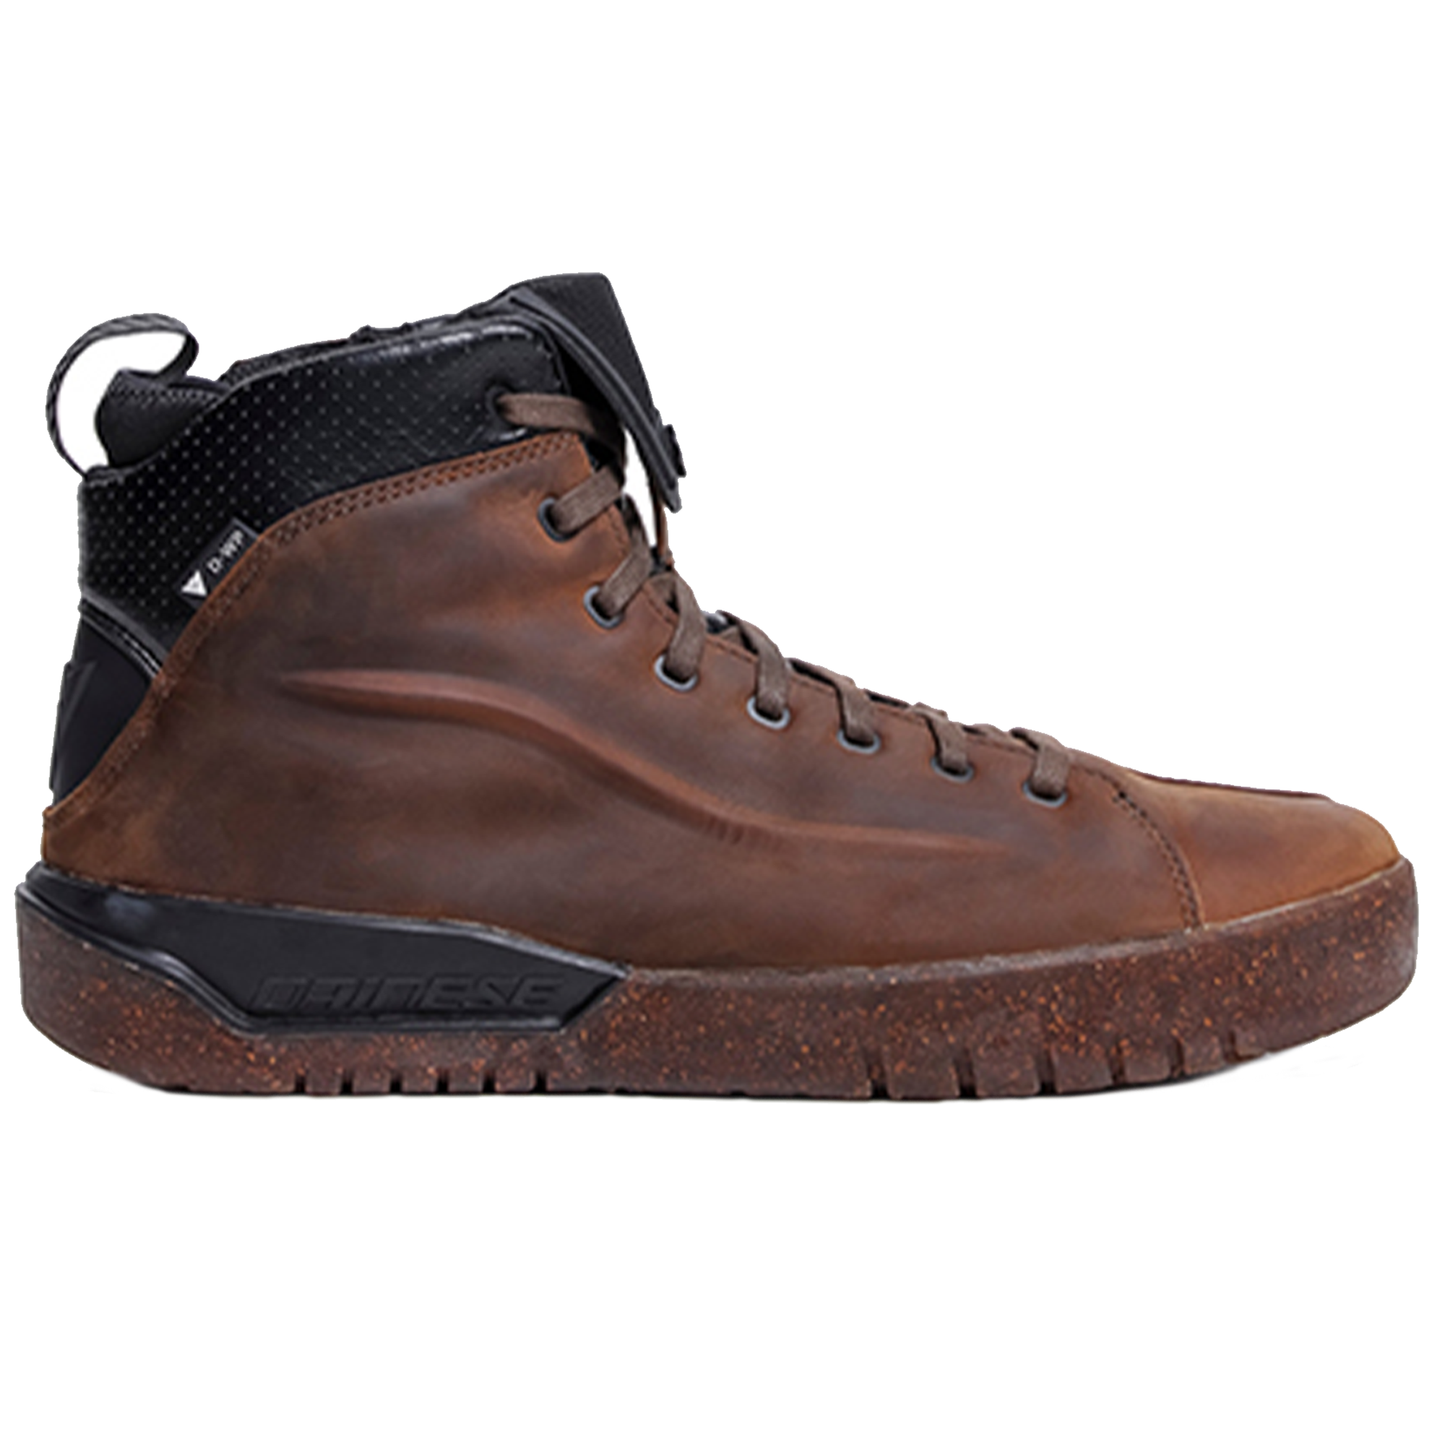 Dainese Metractive D-WP Shoes - Brown/Natural Rubber (261)